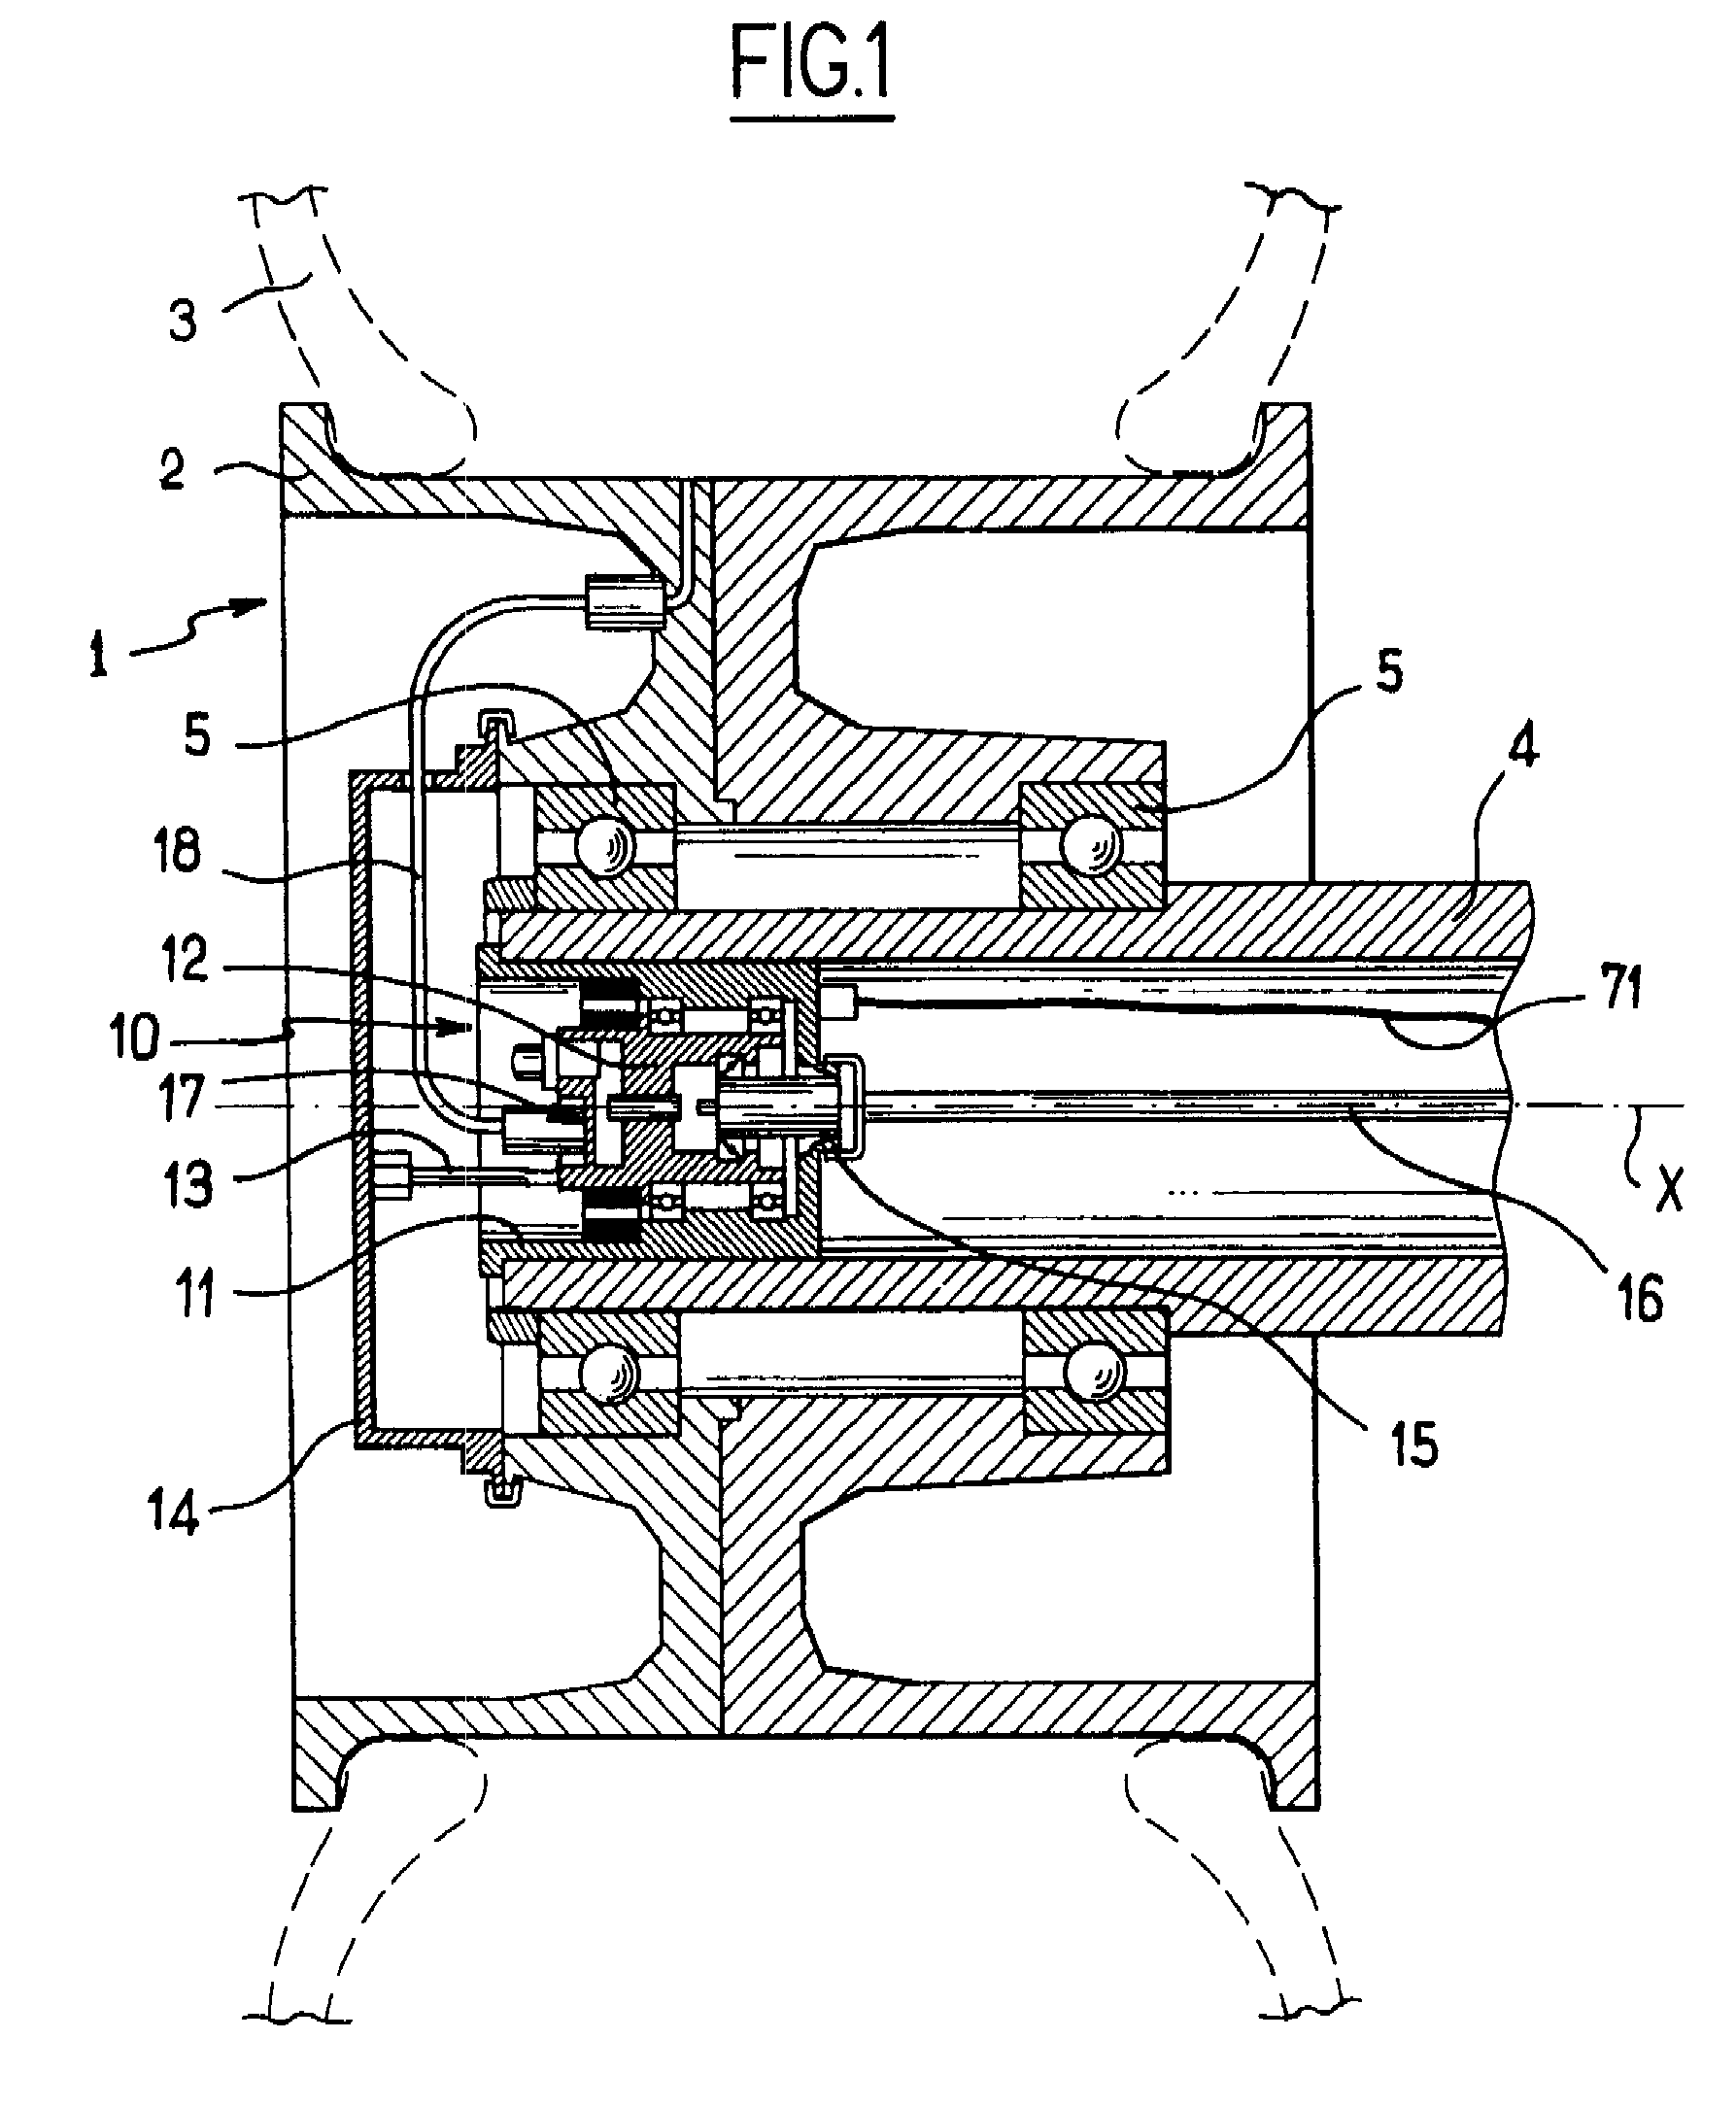 Device for connecting a tire of an aircraft wheel to a pneumatic unit of the aircraft